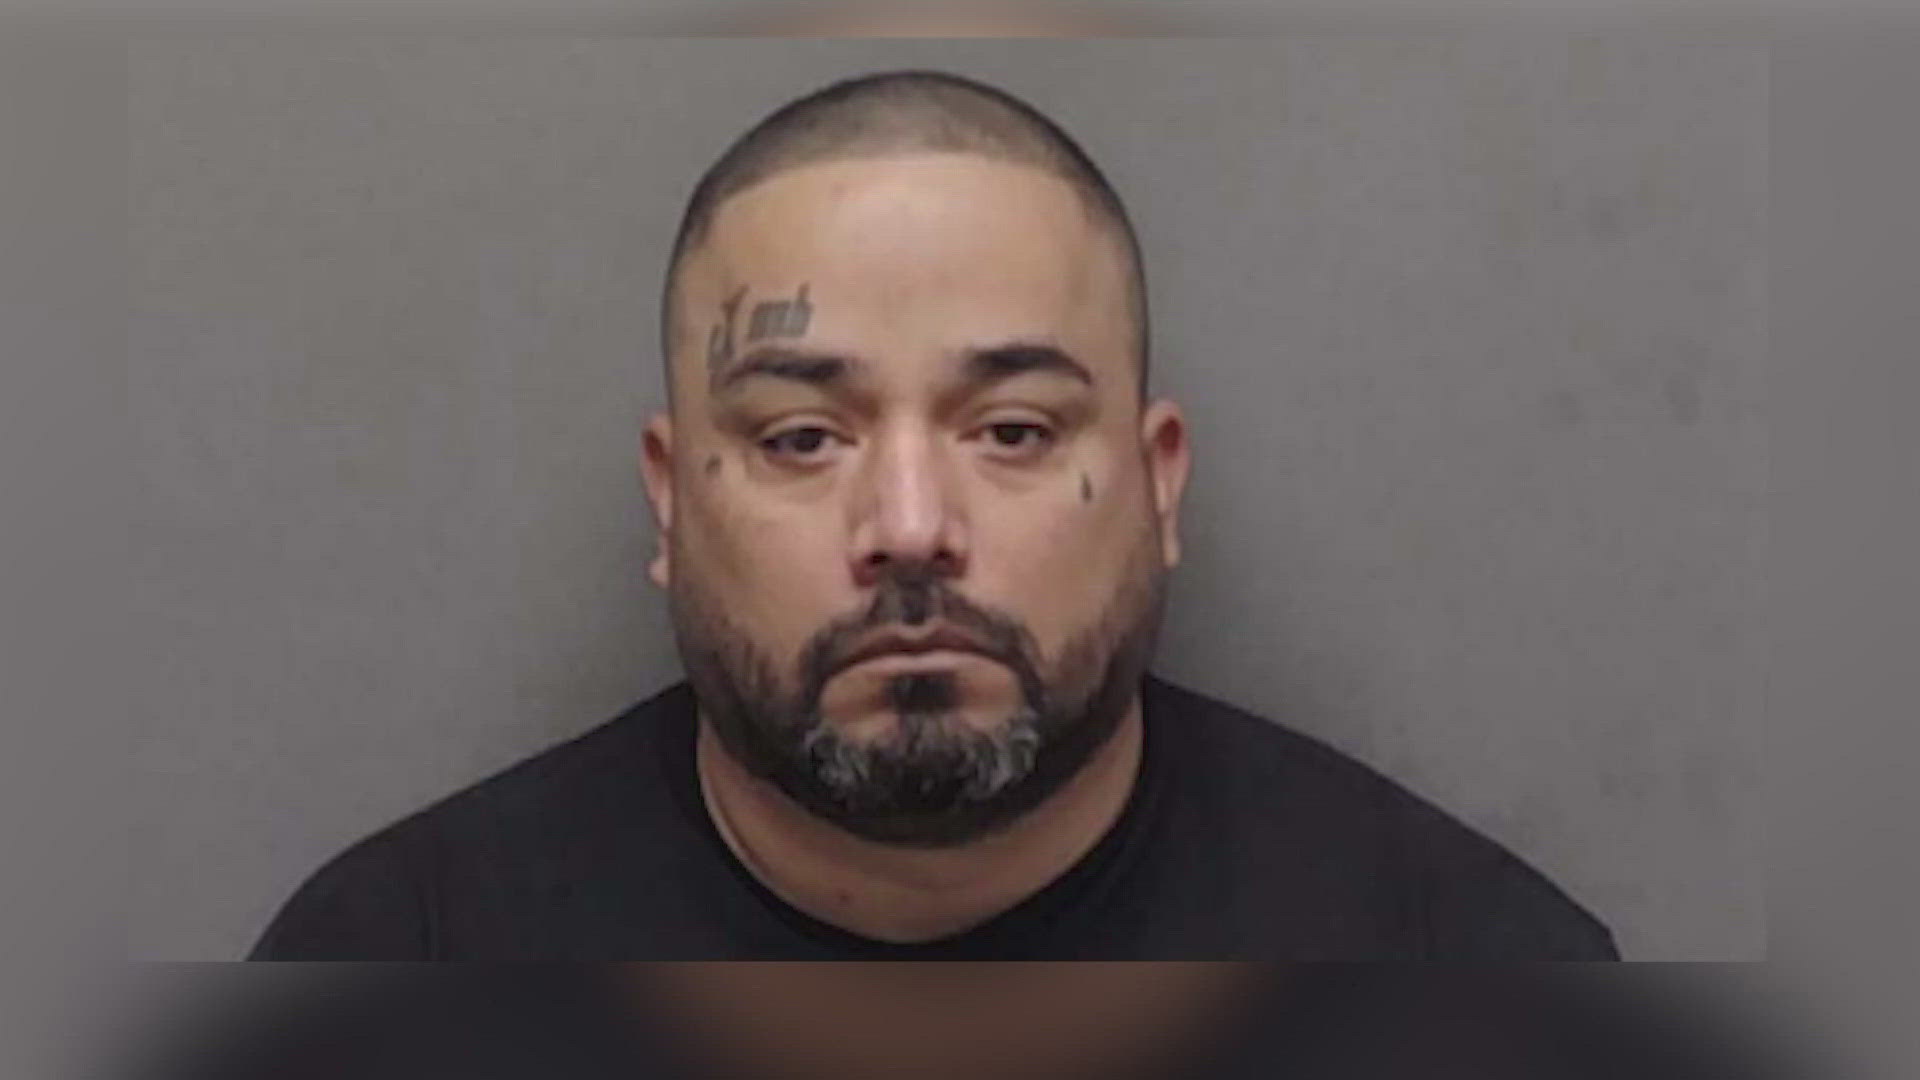 The owner of "The Exception Squad," 40-year-old Joseph Caballero, is facing a charge of sexual assault of a child.